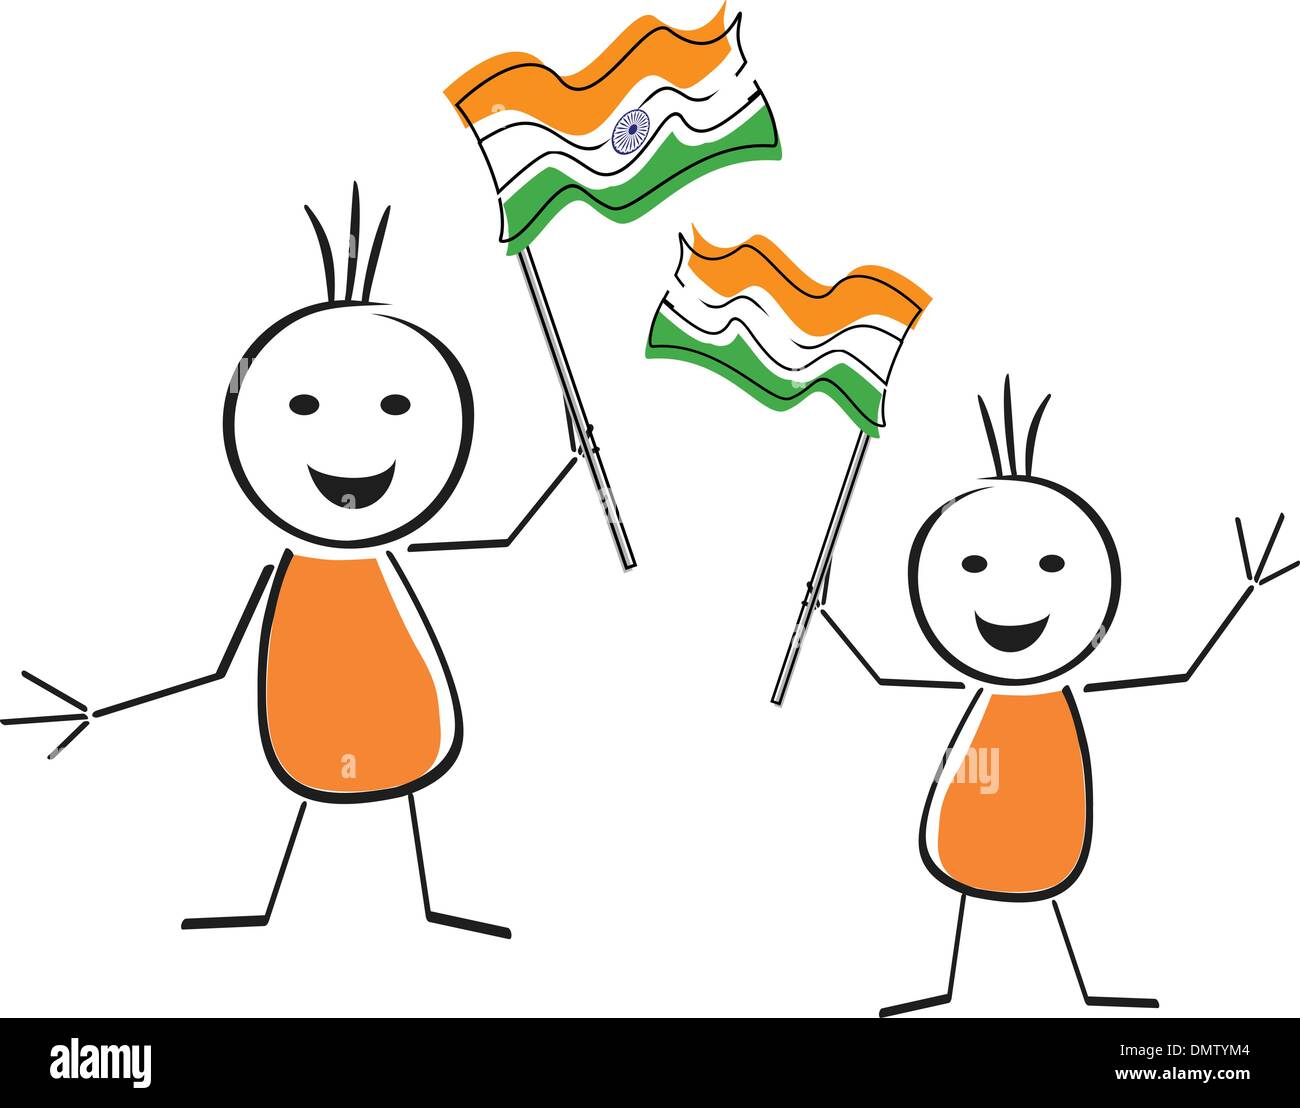 Republic Day Drawing | Curious Times